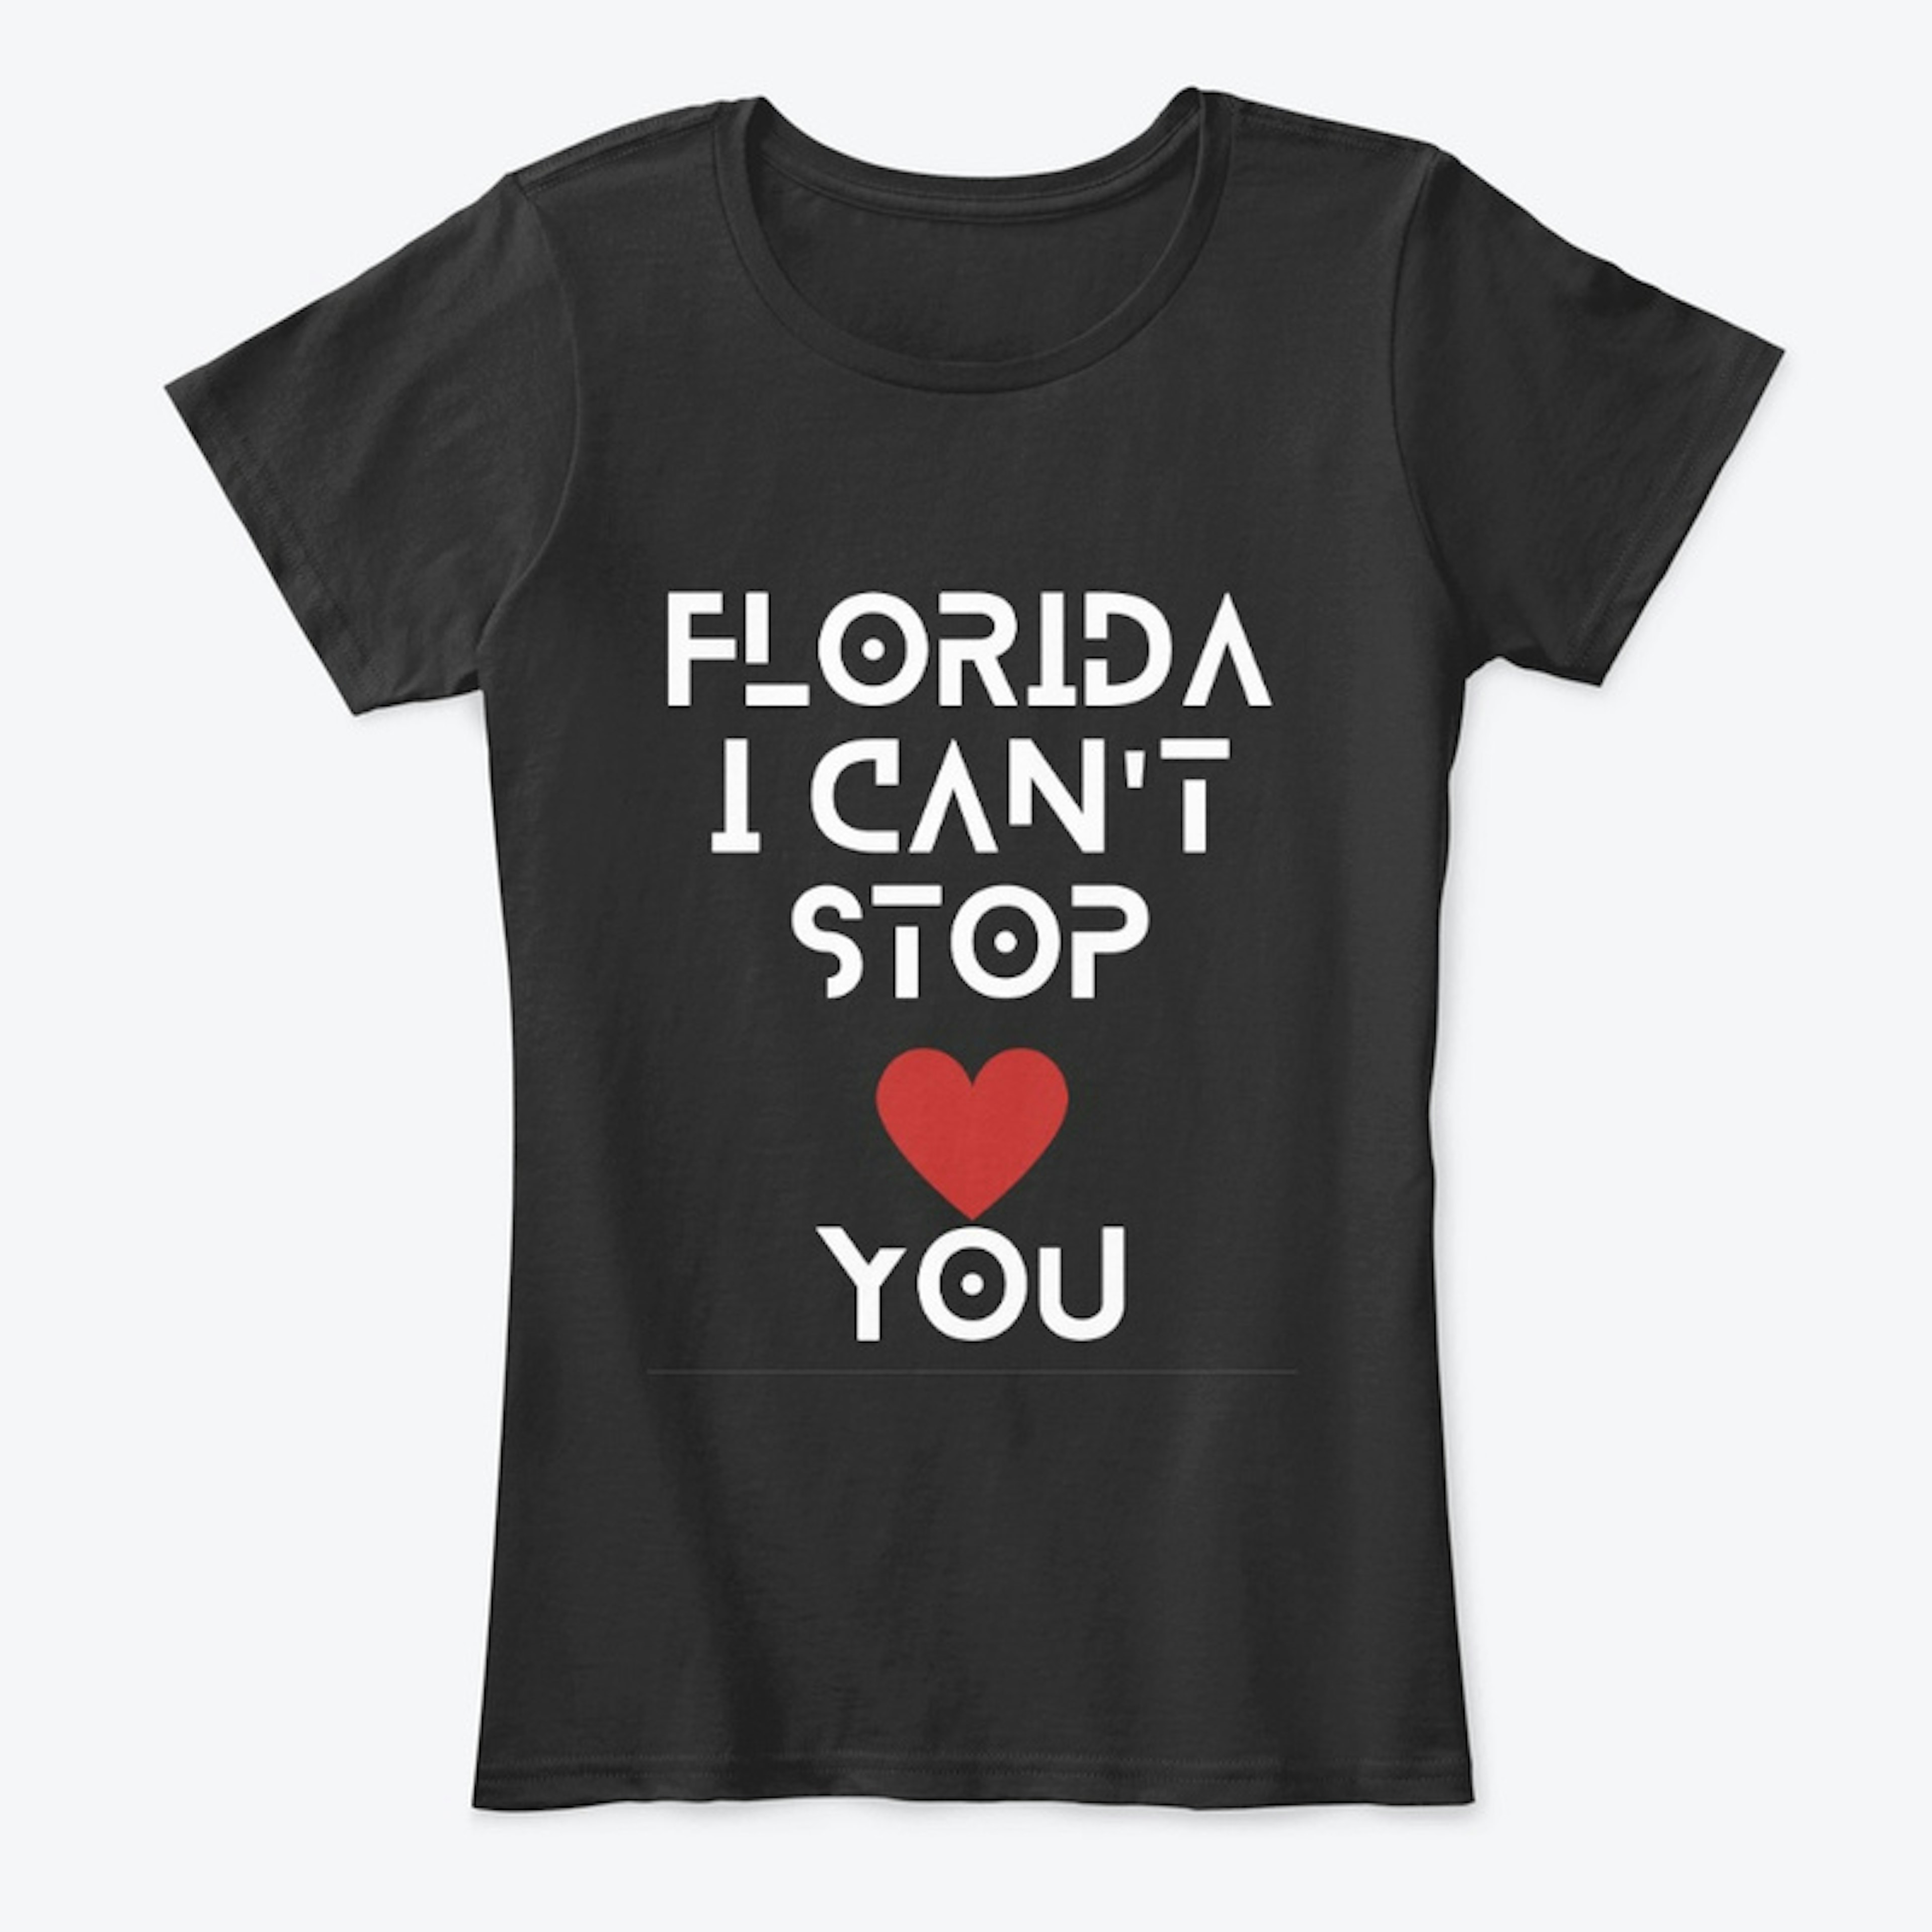 FLORIDA I CAN'T STOP LOVING YOU T-Shirt